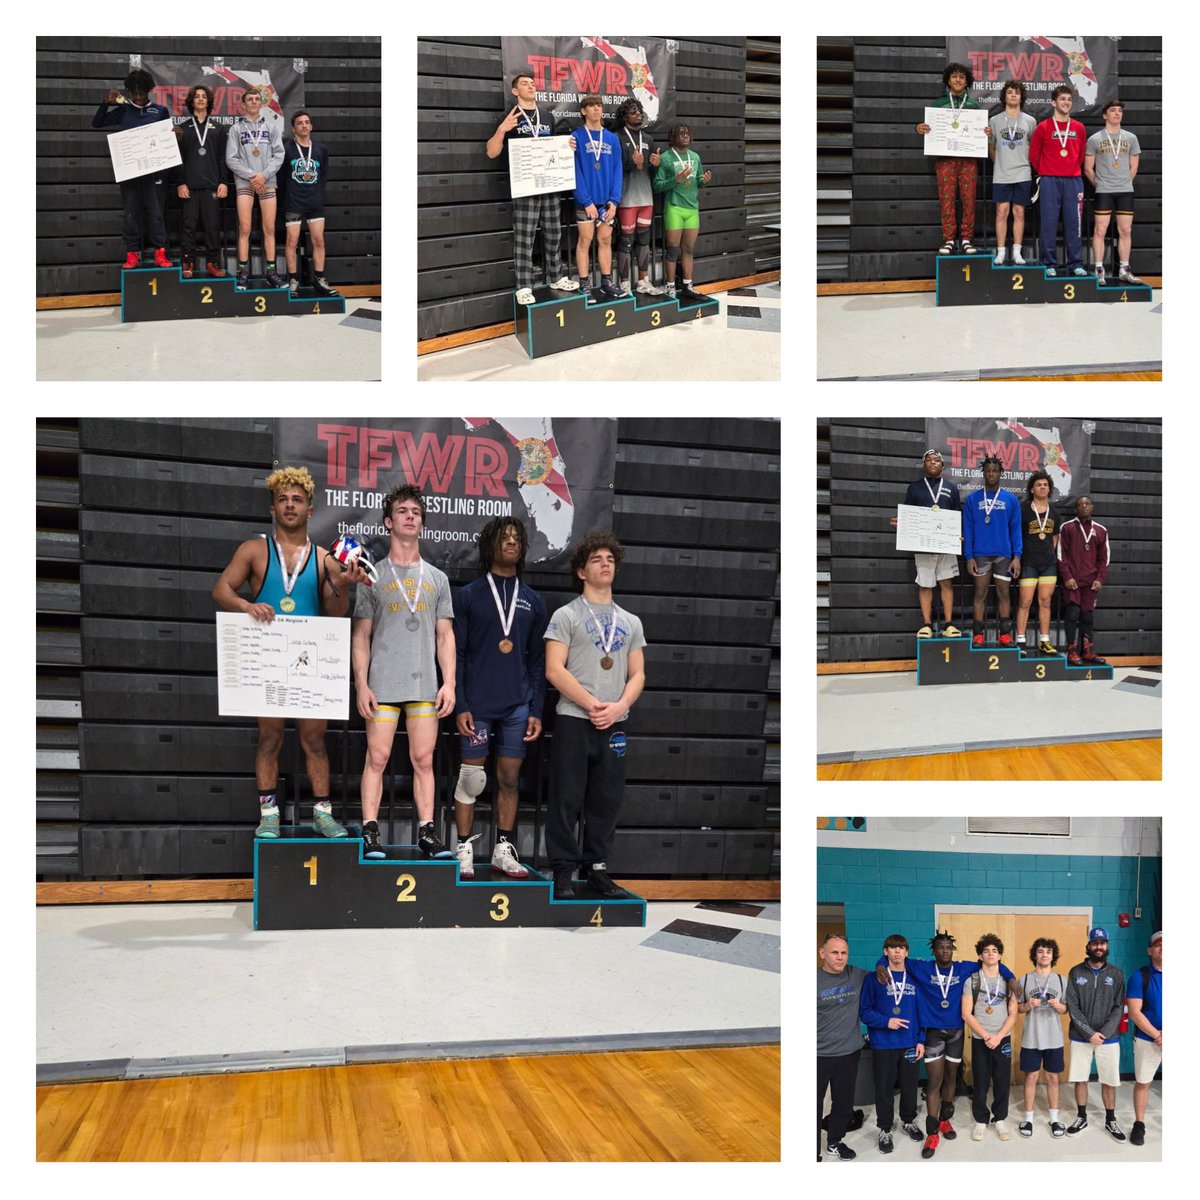 Shark Wrestling finishes 5th out of 33 teams at the regional tournament with 3 regional finalists and 5 state qualifiers Results: TJ Rattiger 4th Kaden Wheeler 4th Lucas Boecker 2nd🥈 Carlos Almanza 2nd🥈 JT Tumblin 2nd🥈 @SharksWrestle @SRHS_SHARKS @SRHS_Sport